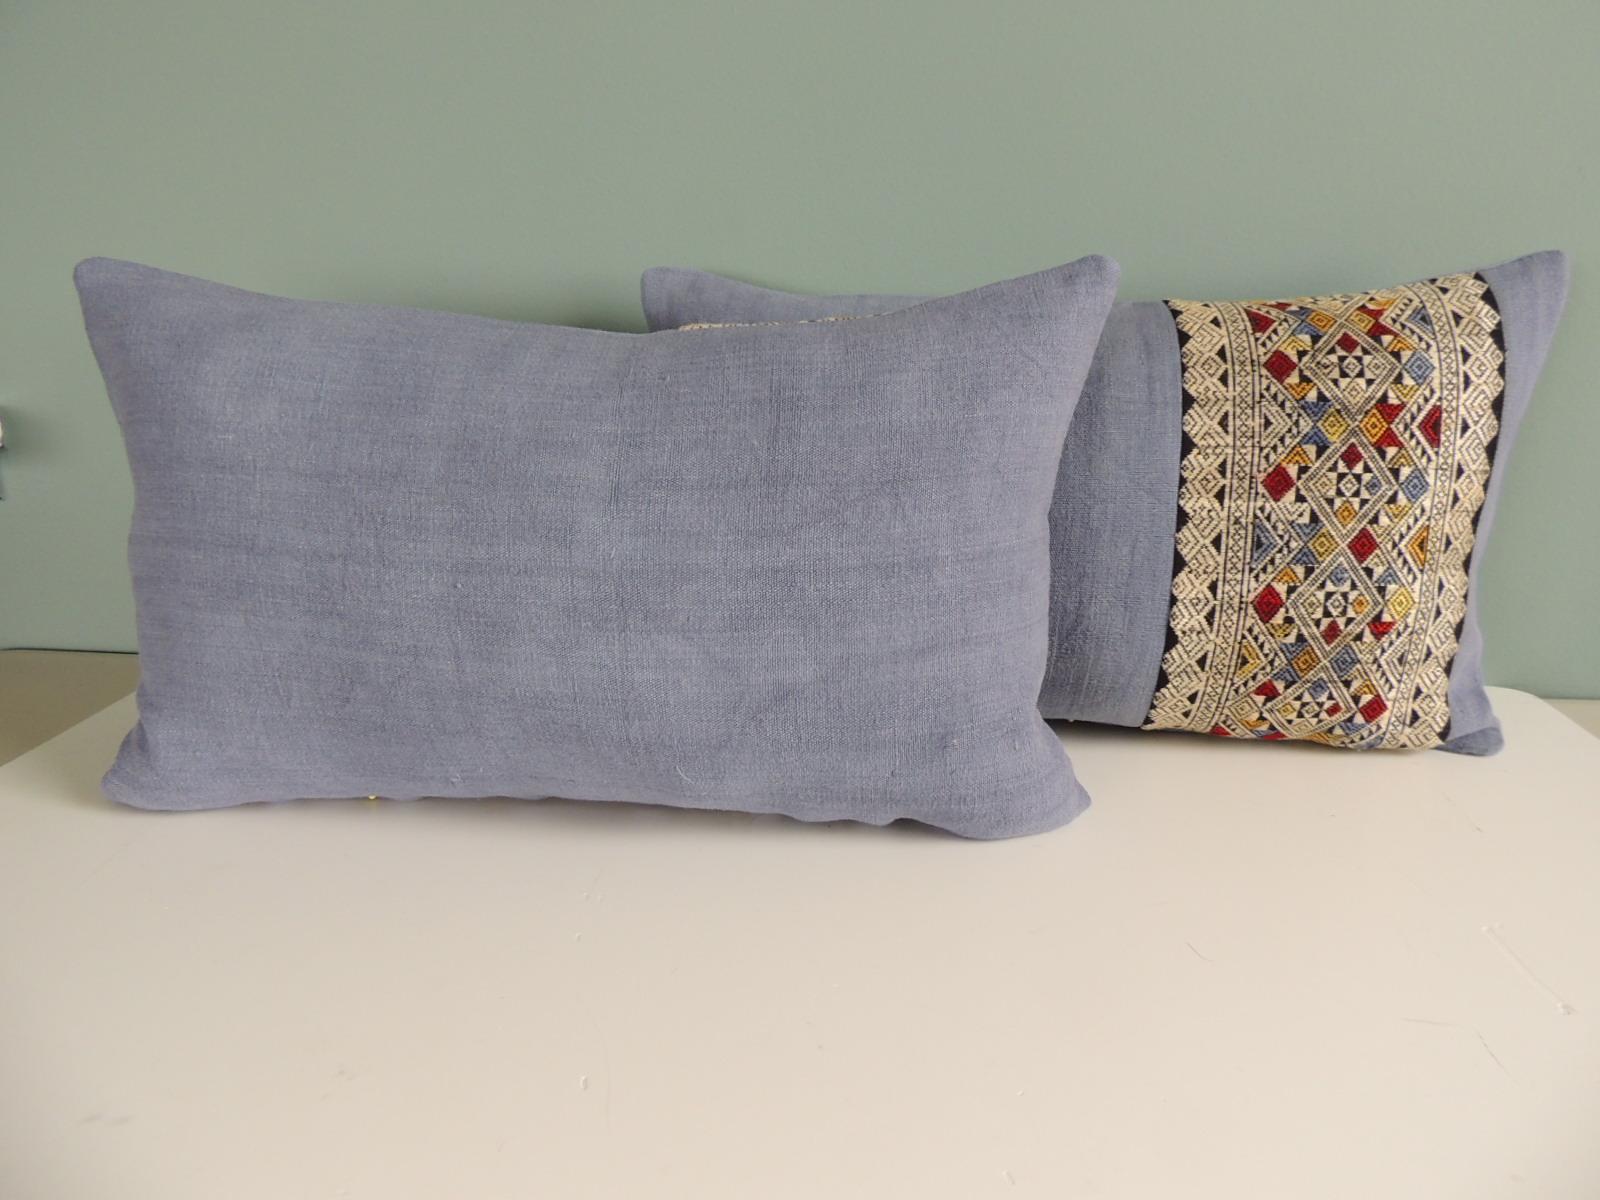 Hand-Crafted Pair of Vintage Lavender and White Asian Decorative Lumbar Pillows